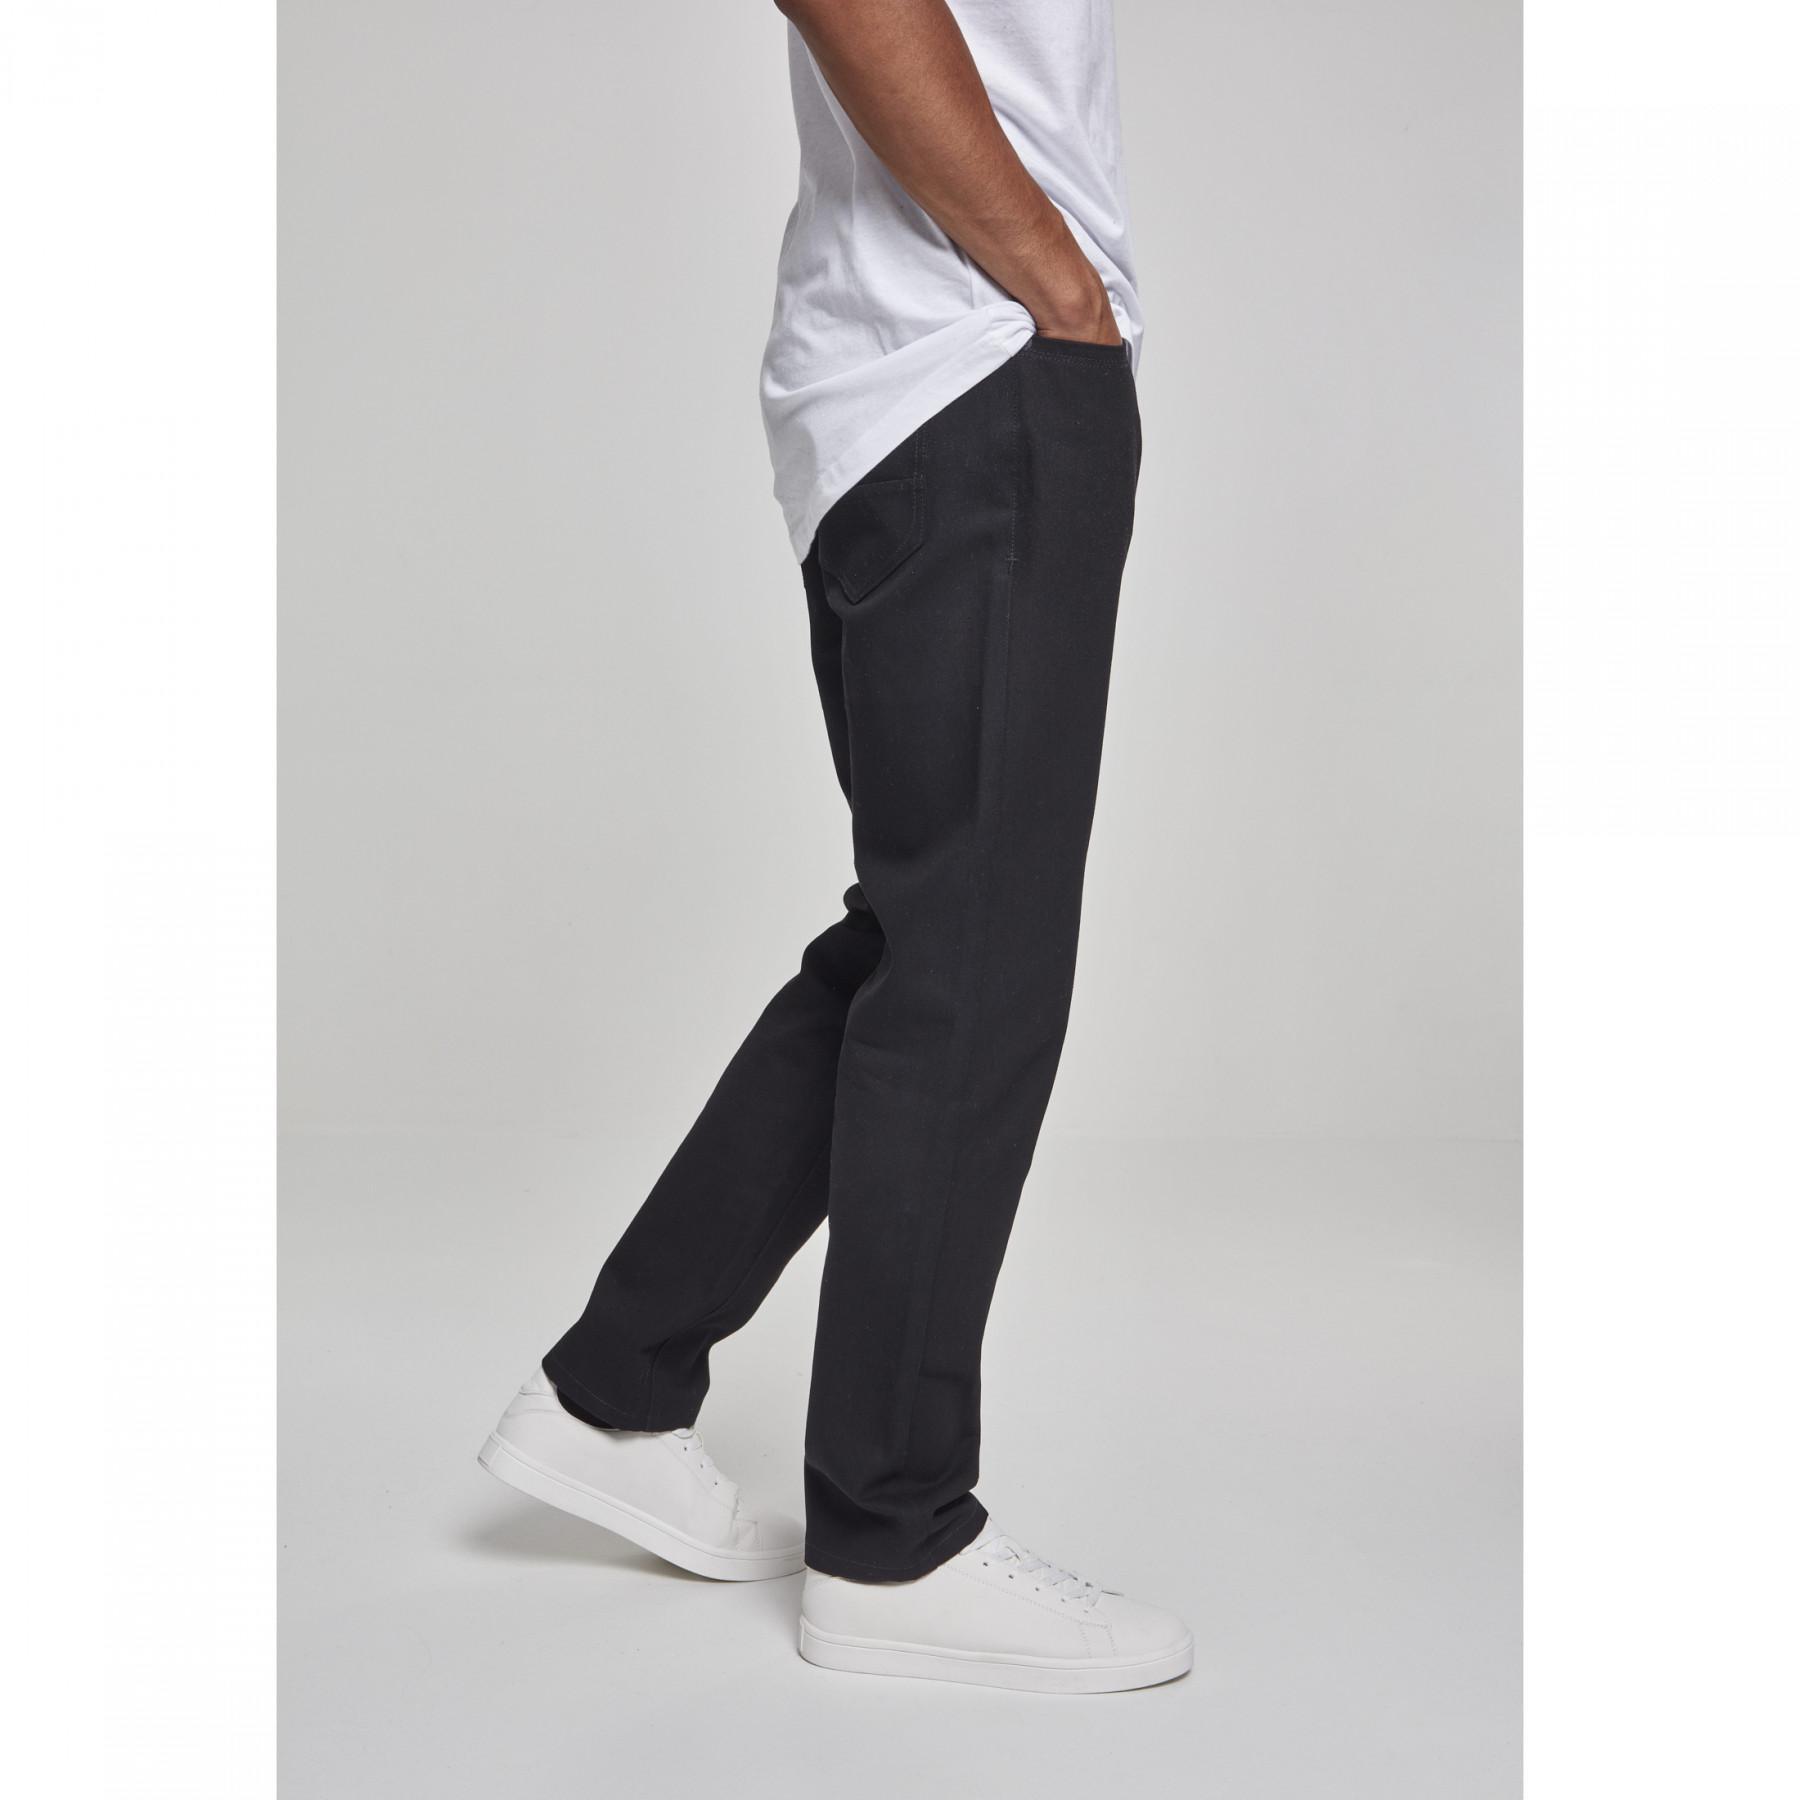 Pants Urban Classics relaxed 5 pocket jeans